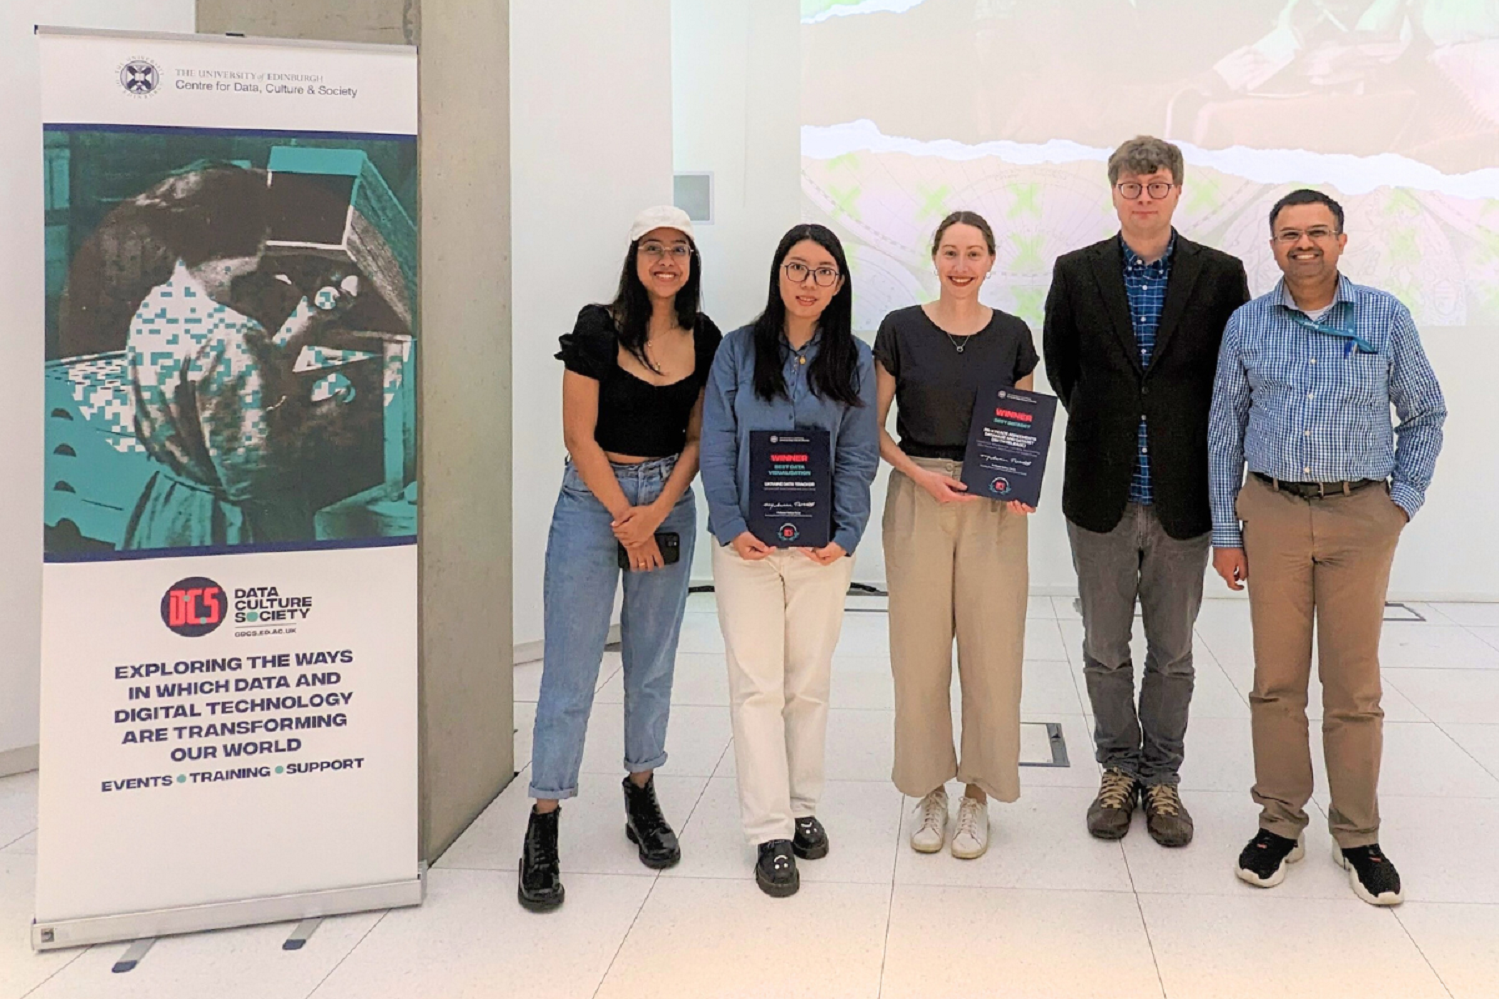 PeaceRep team members (L-R) Shivangi Bansal, Jinrui Wang, Laura Wise, Adam Farquhar, and Devanjan Bhattacharya at the 2023 Centre for Data, Culture & Society's Digital Research Prizes event (May 2023)